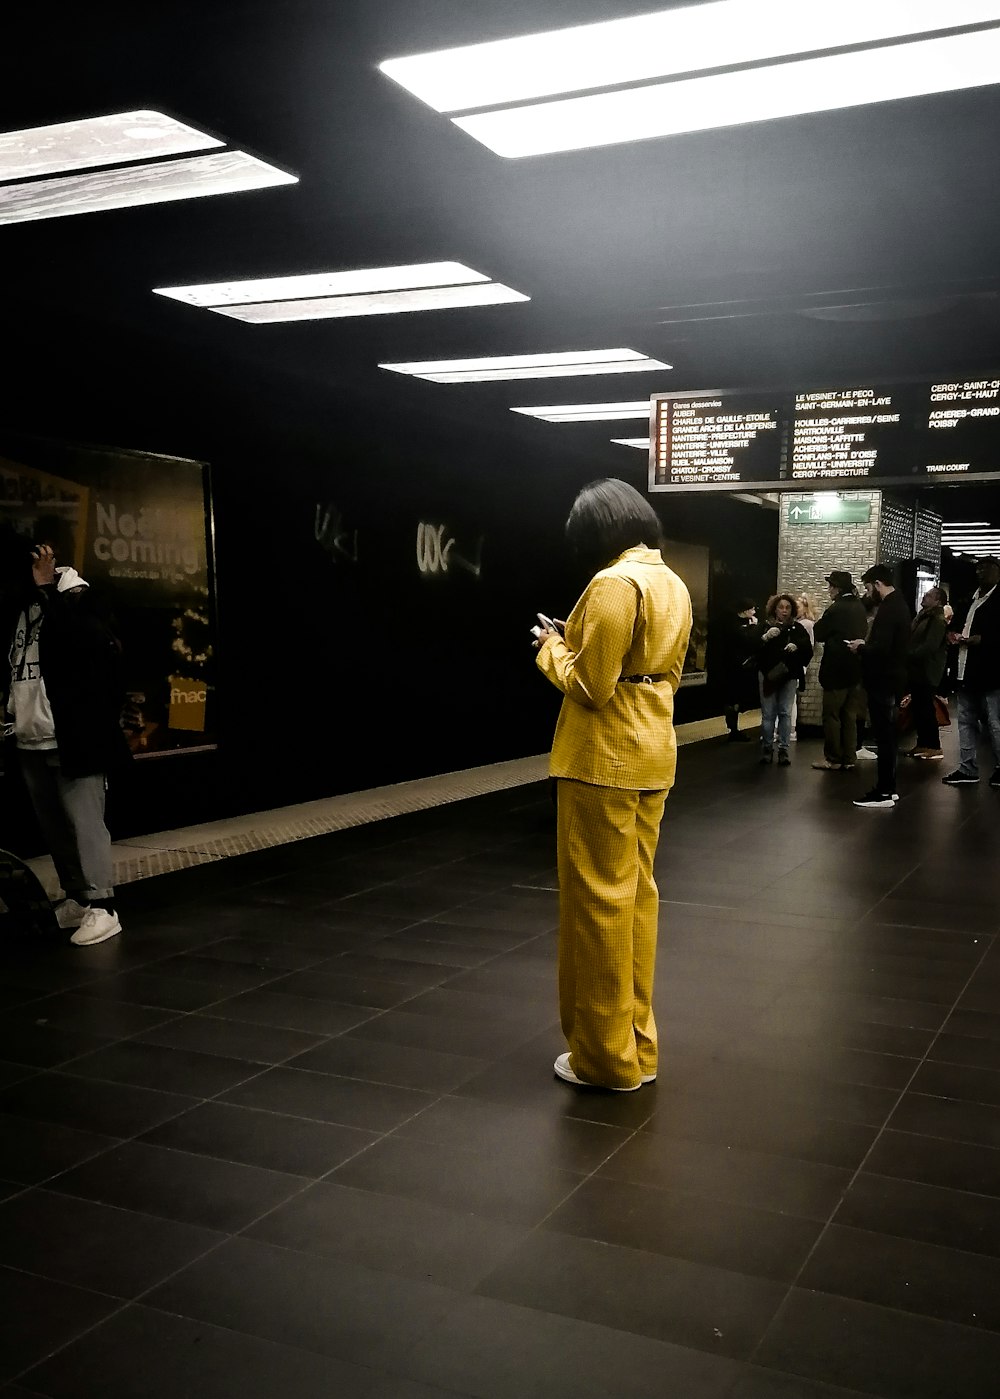 a person in a yellow outfit standing in a subway station